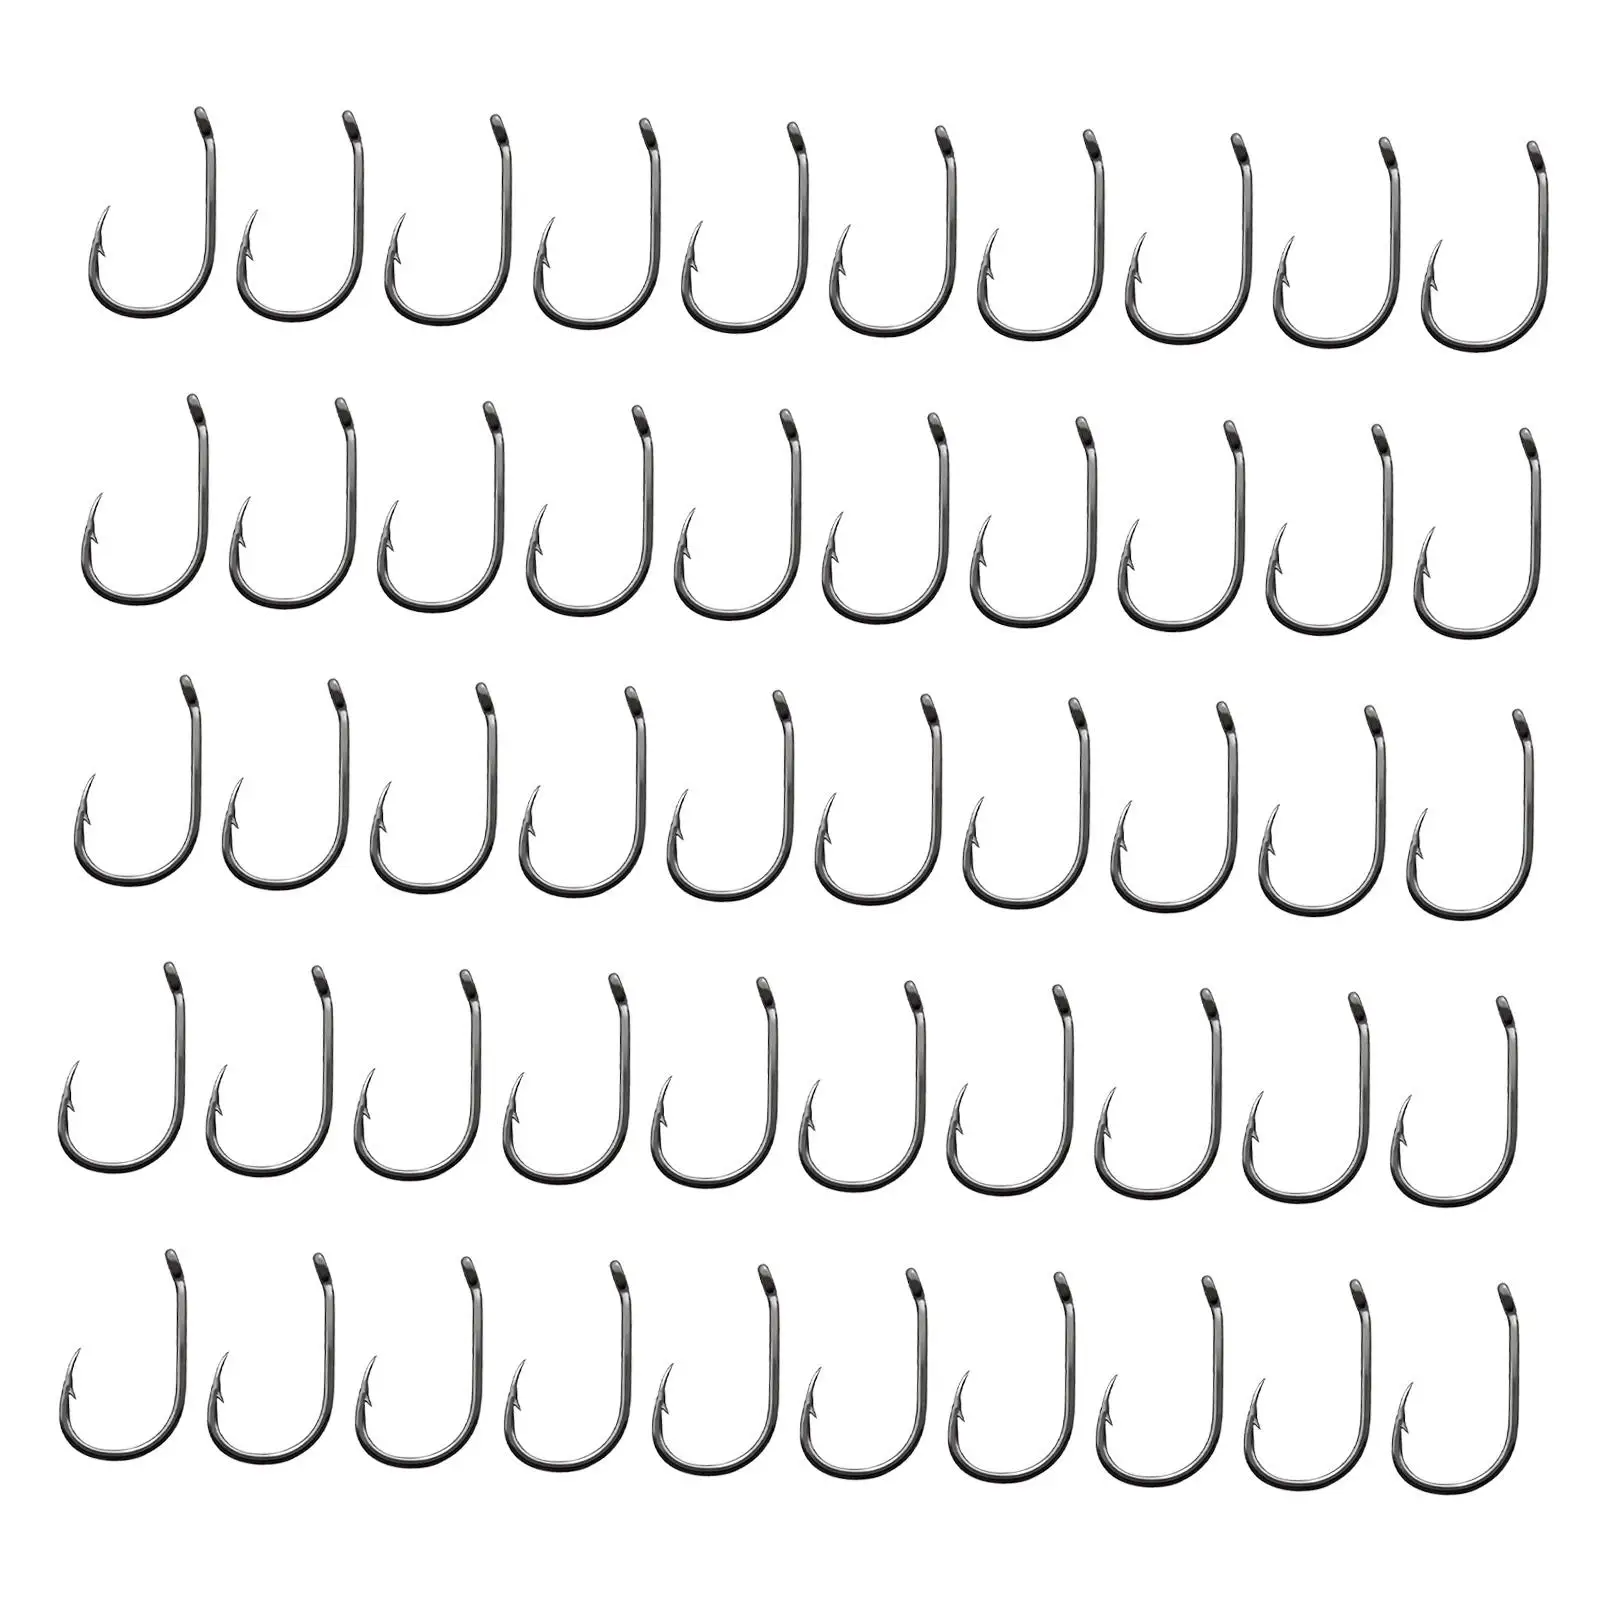 50x Barb Curved Fly Fishing Hooks for Fishing Lures Sea Fishing Tackle Hooks Fly Hooks for Sports Freshwater Saltwater Outdoor